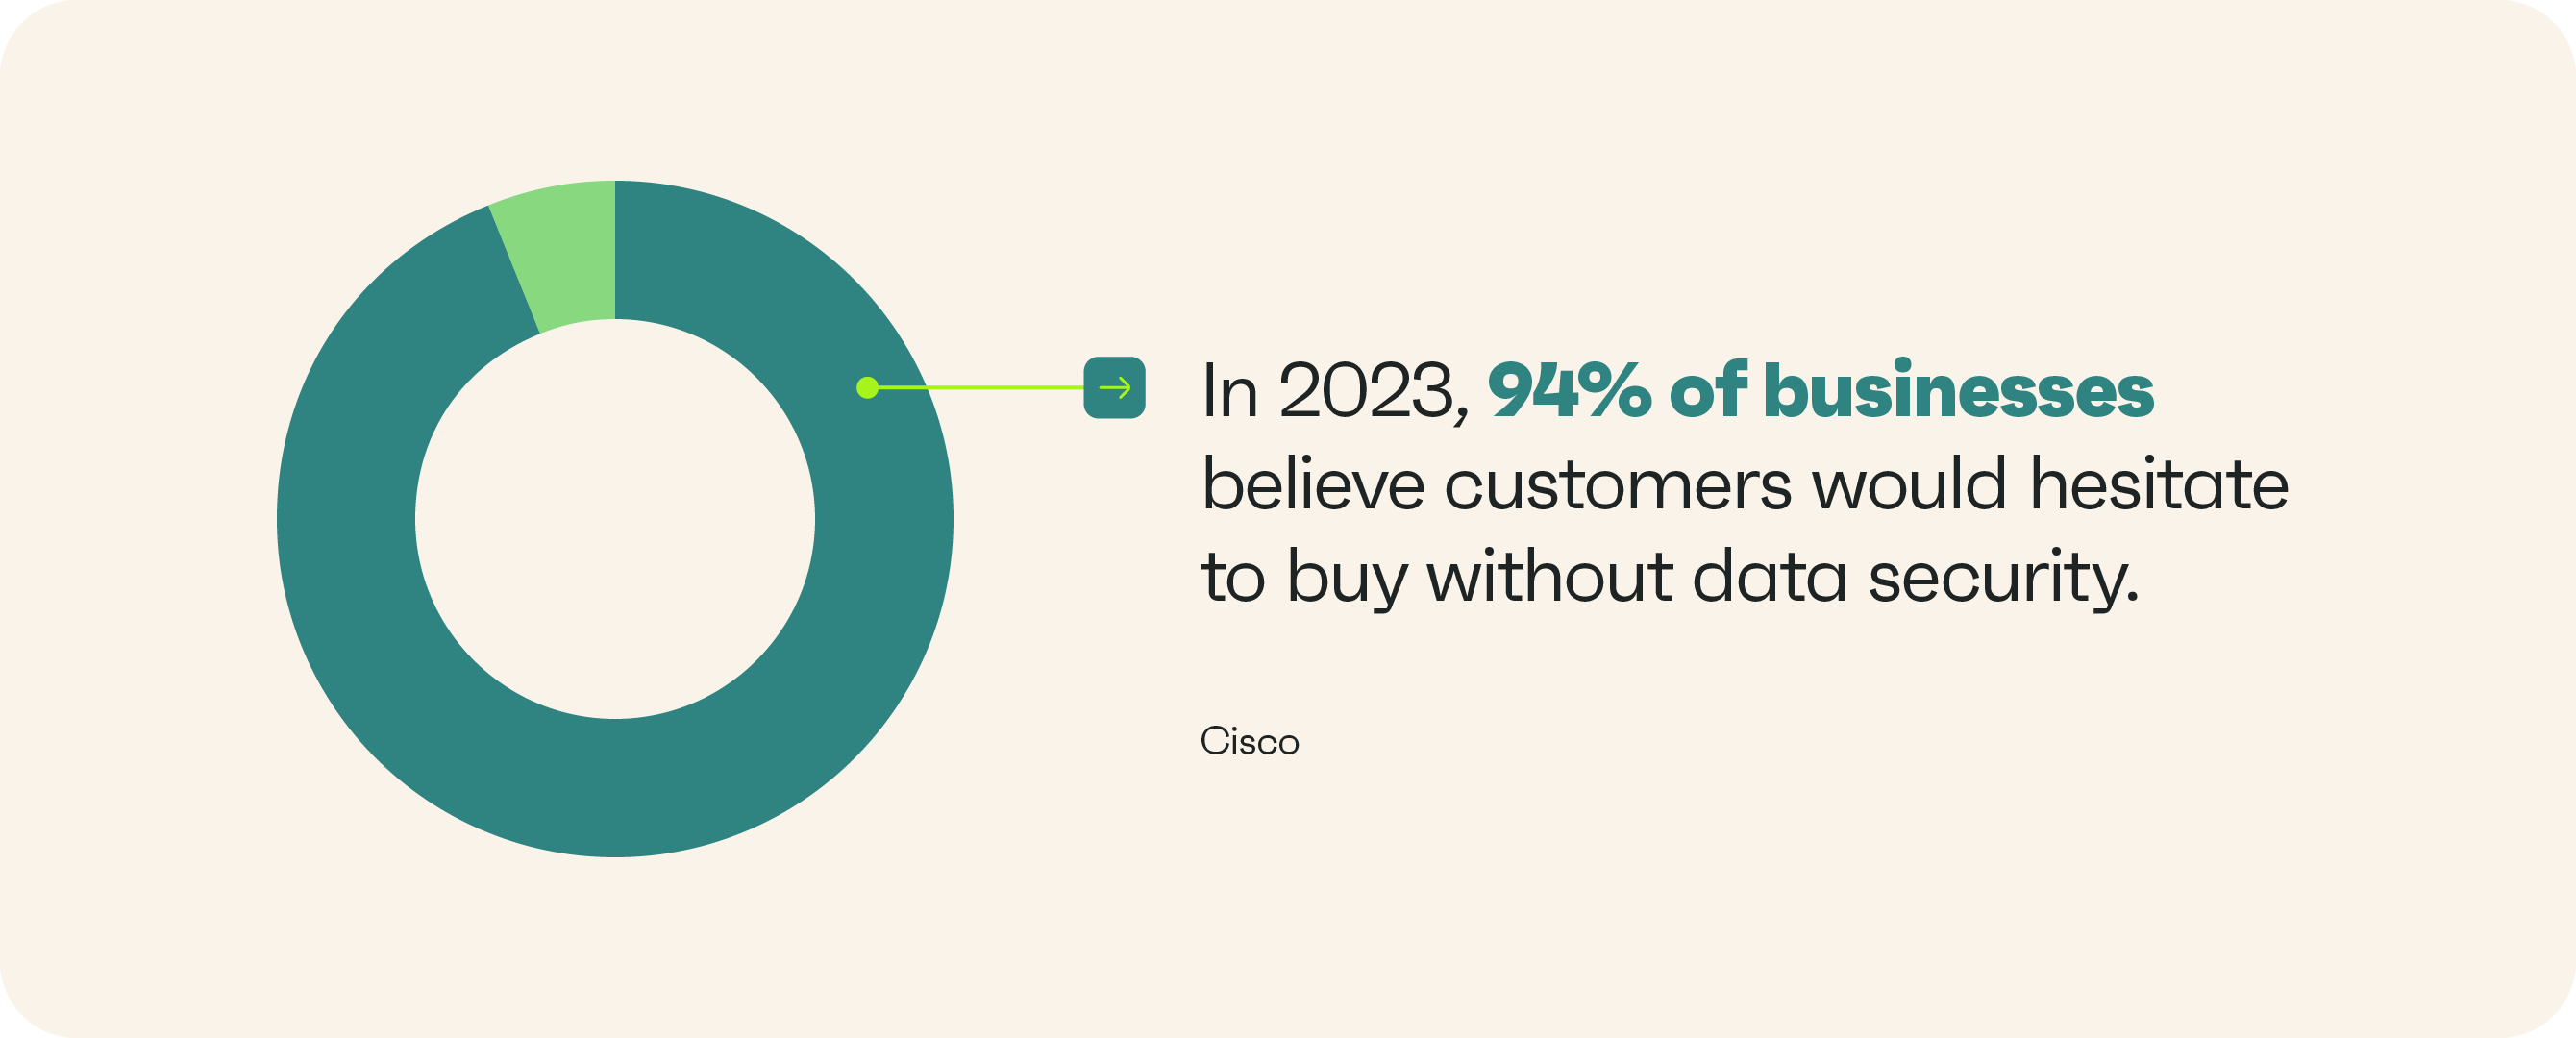 In 2023, 94% of businesses believe customers would hesitate to buy without data security